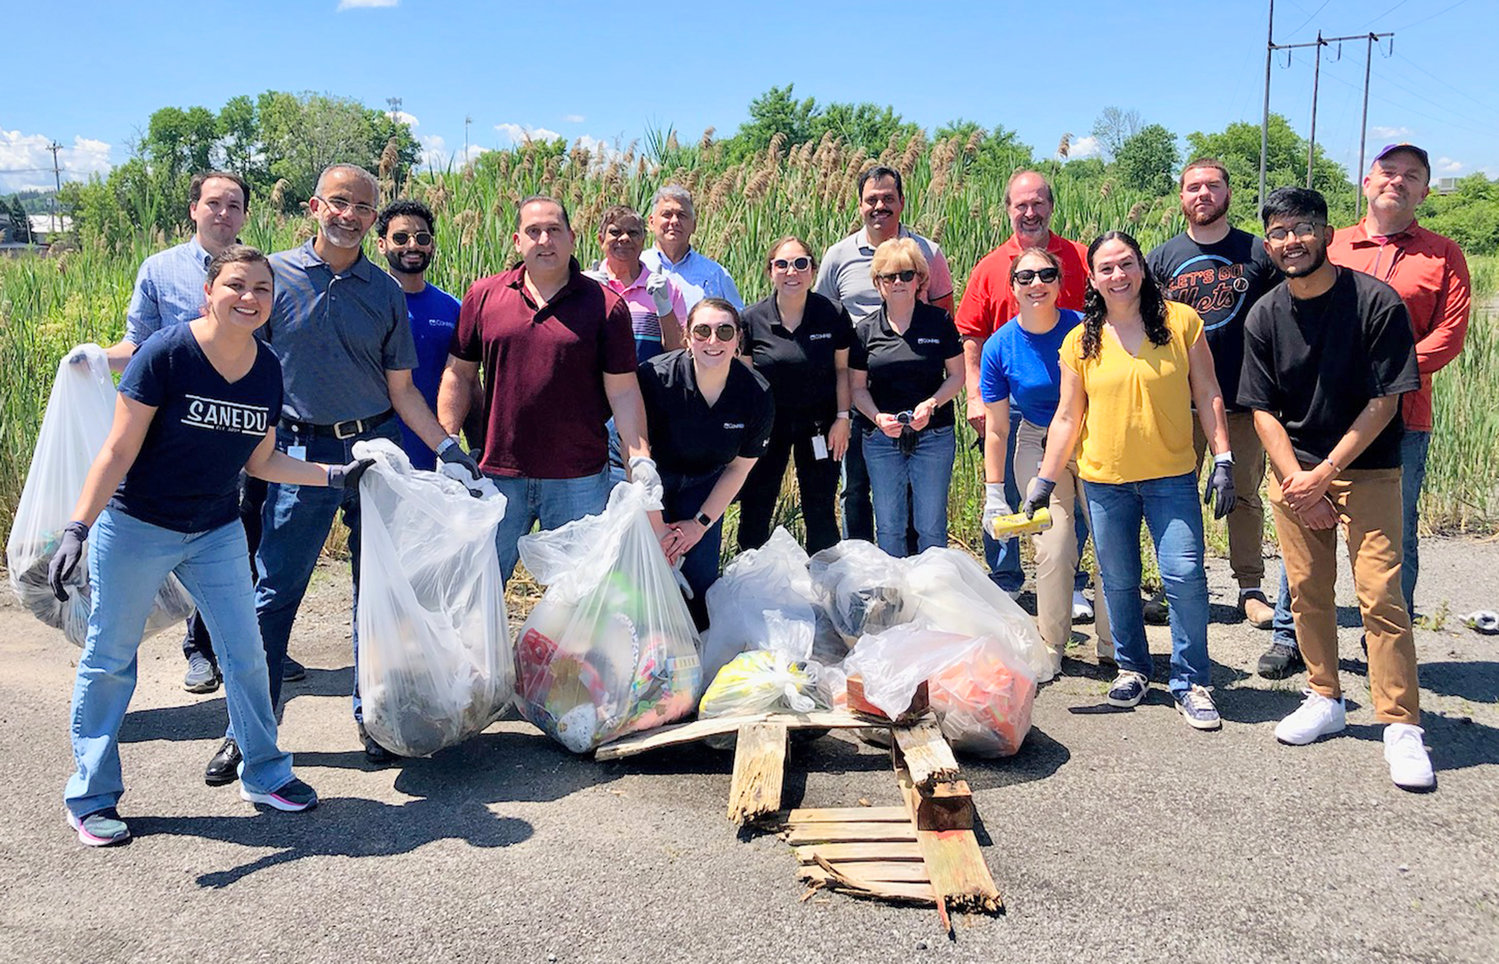 ConMed employees gathered to clean up the green space around CONMED’s property. Thirty employees volunteered, collecting over 20 bags of litter.